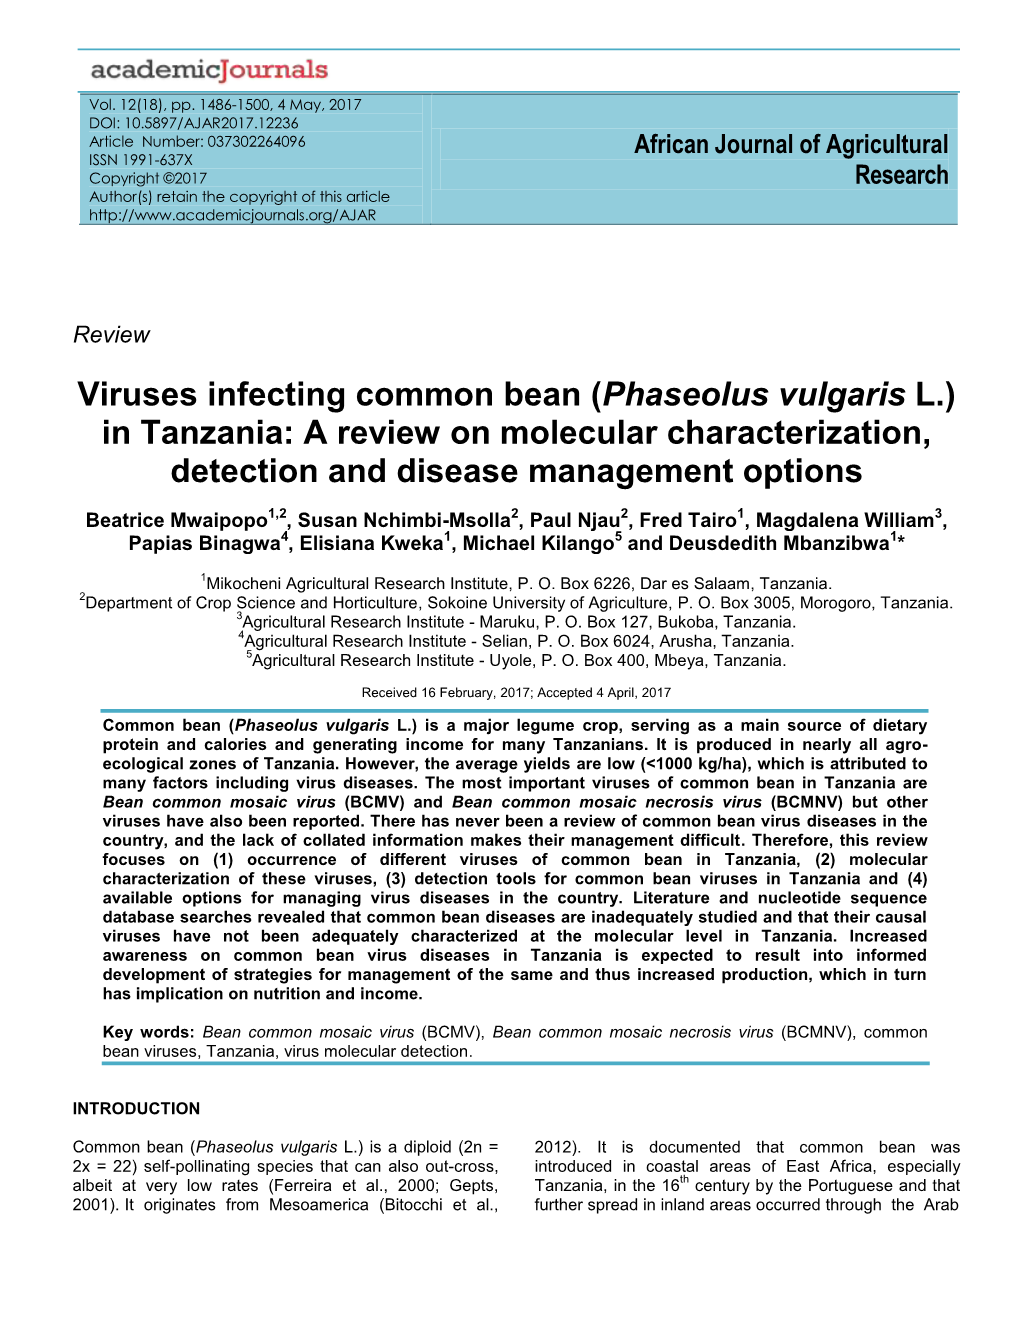 Viruses Infecting Common Bean (Phaseolus Vulgaris L.) in Tanzania: a Review on Molecular Characterization, Detection and Disease Management Options